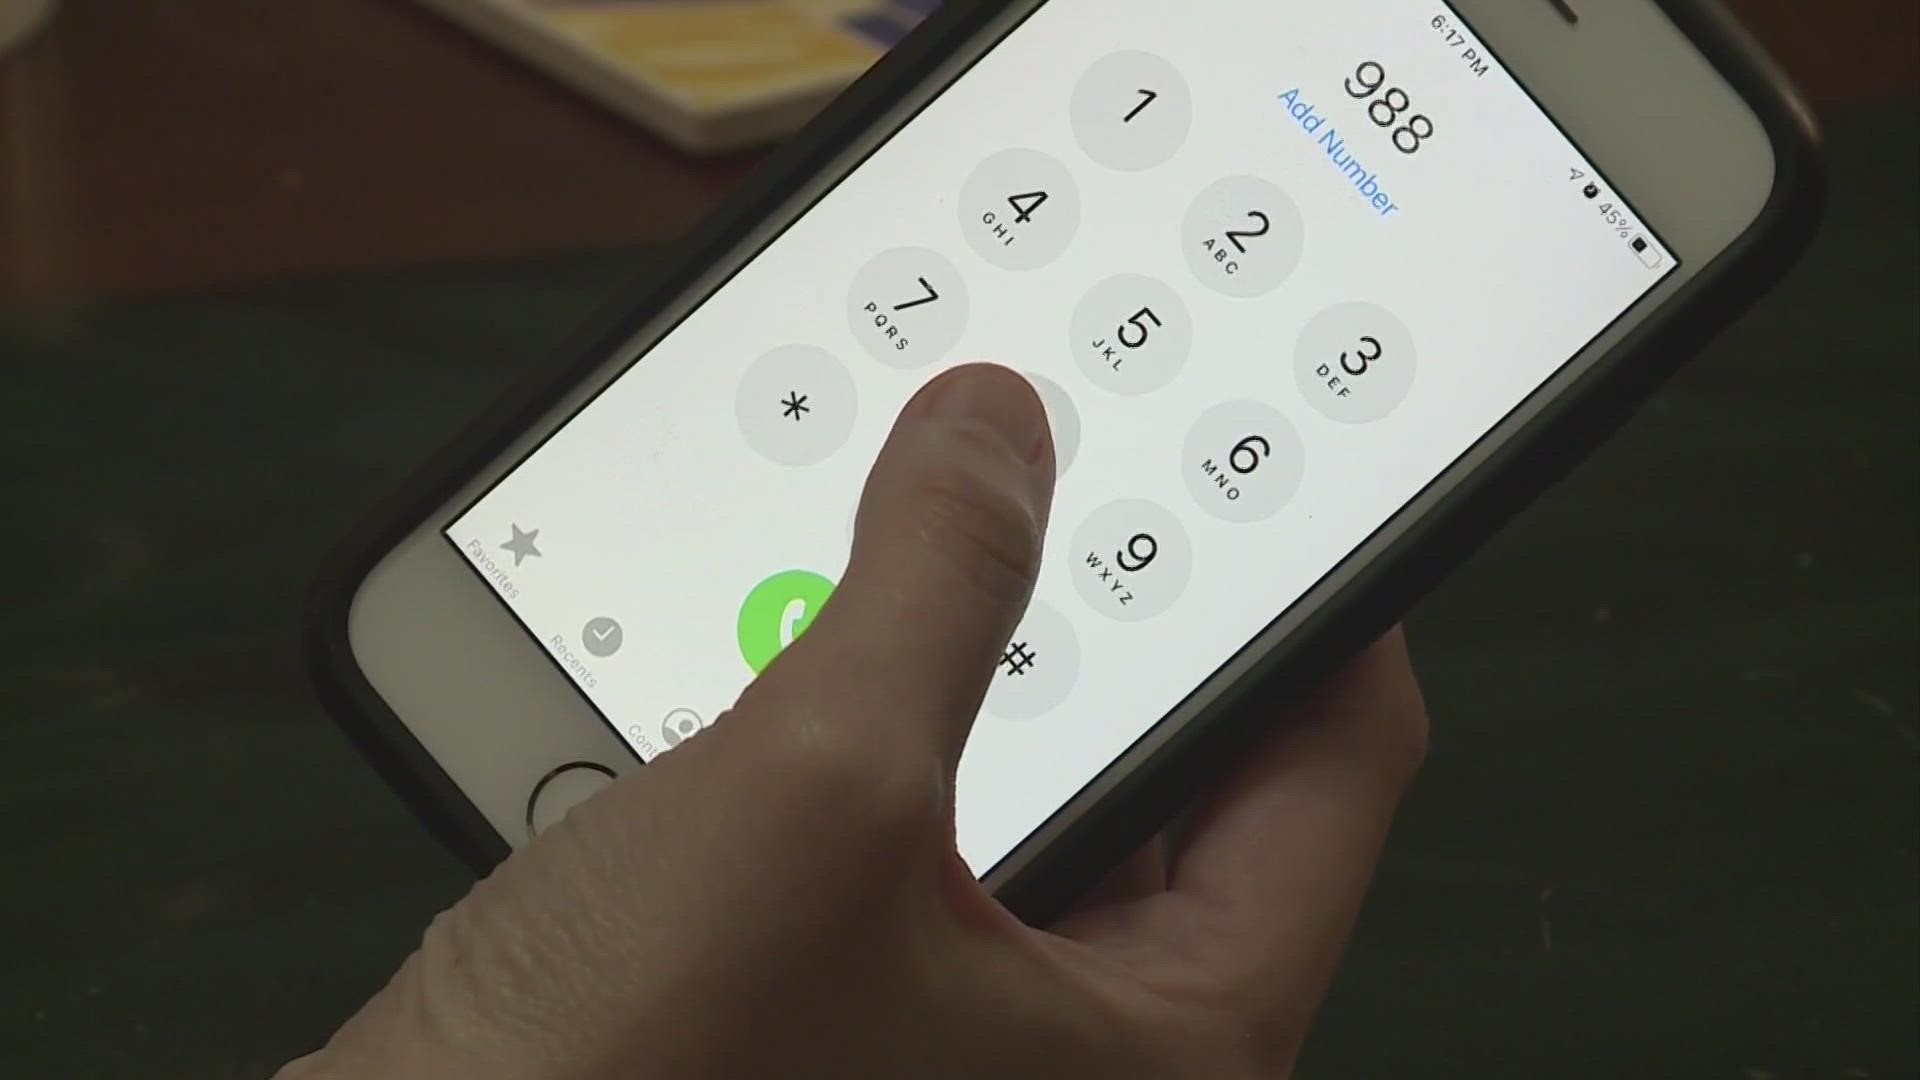 While some Ohioans can connect to the Lifeline by dialing 988 now, this dialing code will be available to everyone across the United States starting on Saturday.